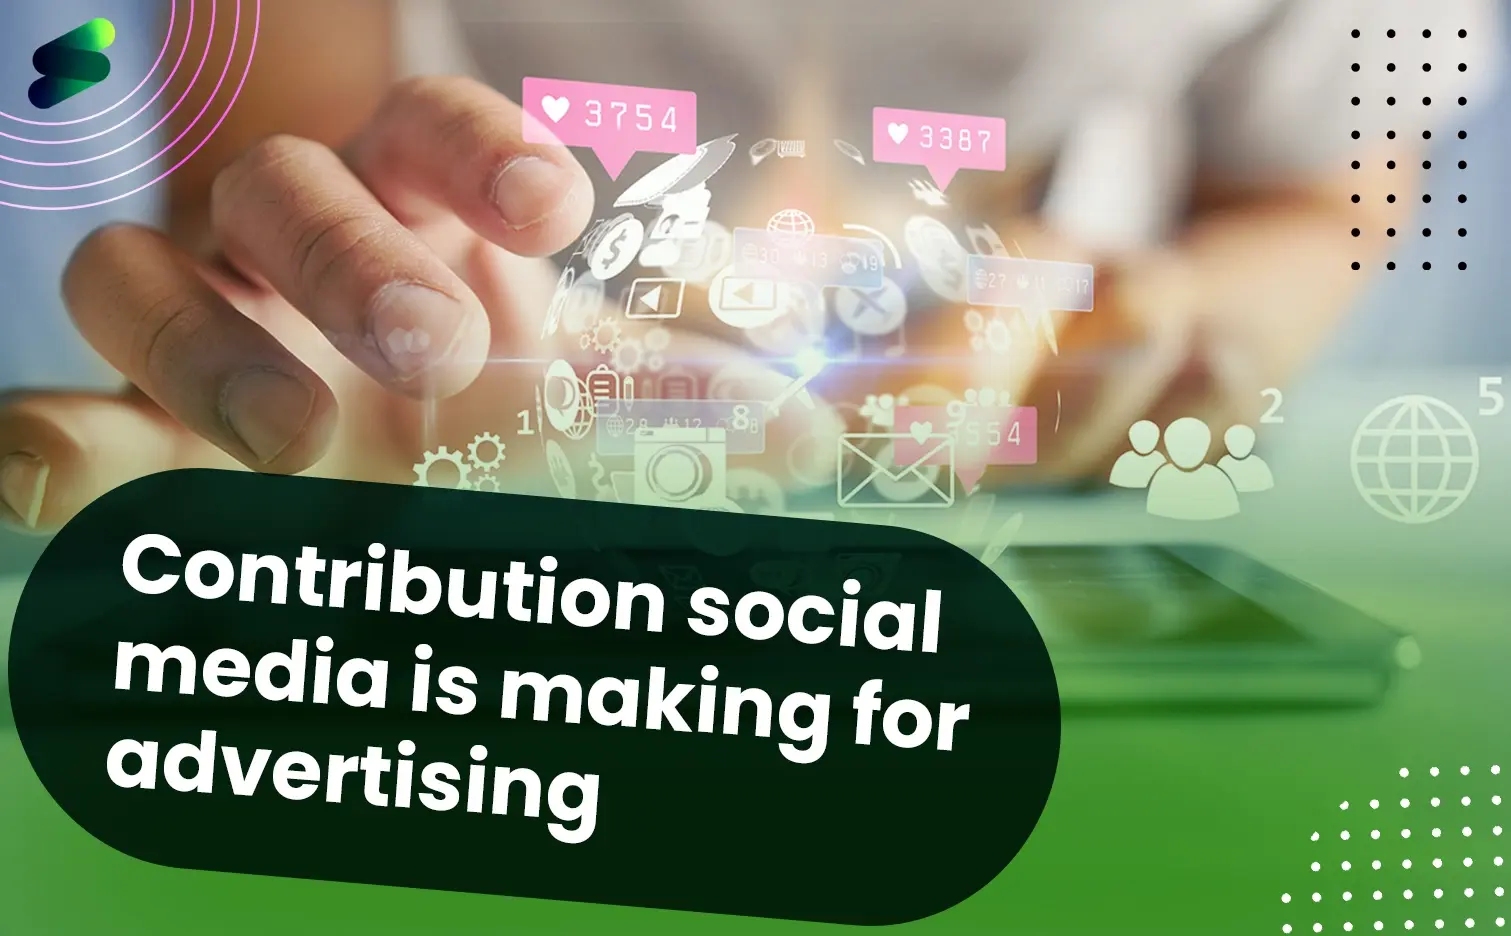 Contribution social media is making for advertising